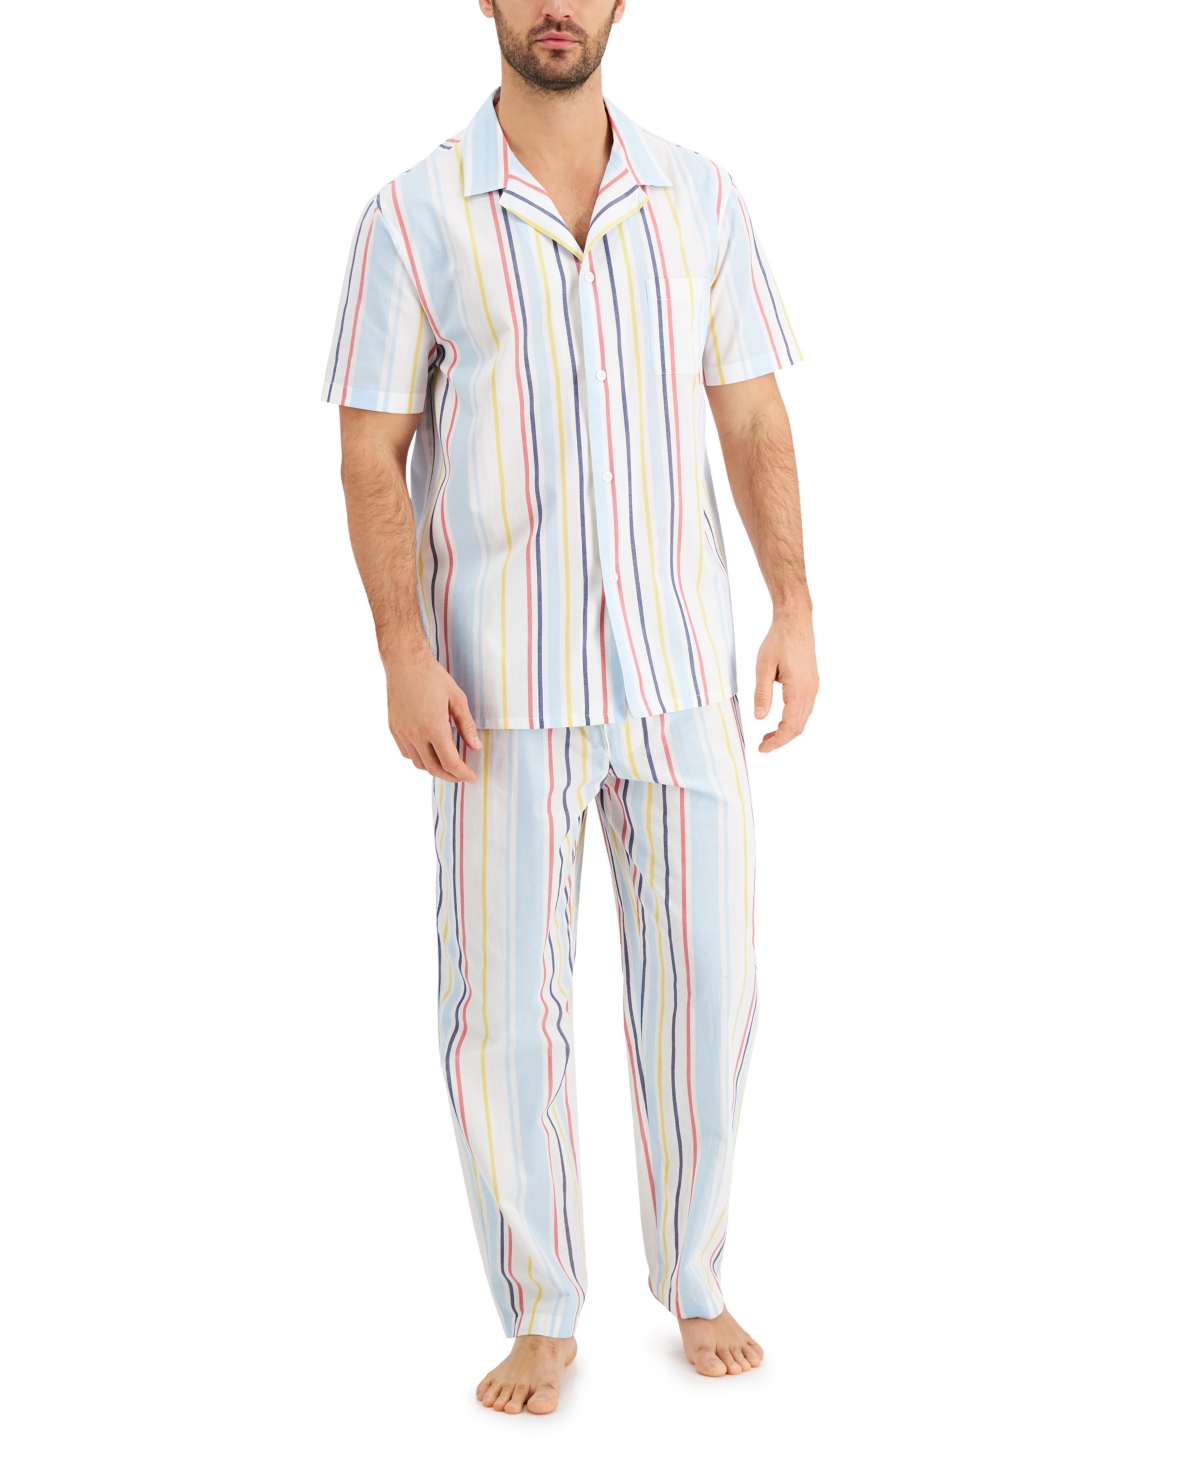 Men's Striped Pajamas, Created for Macy's - White